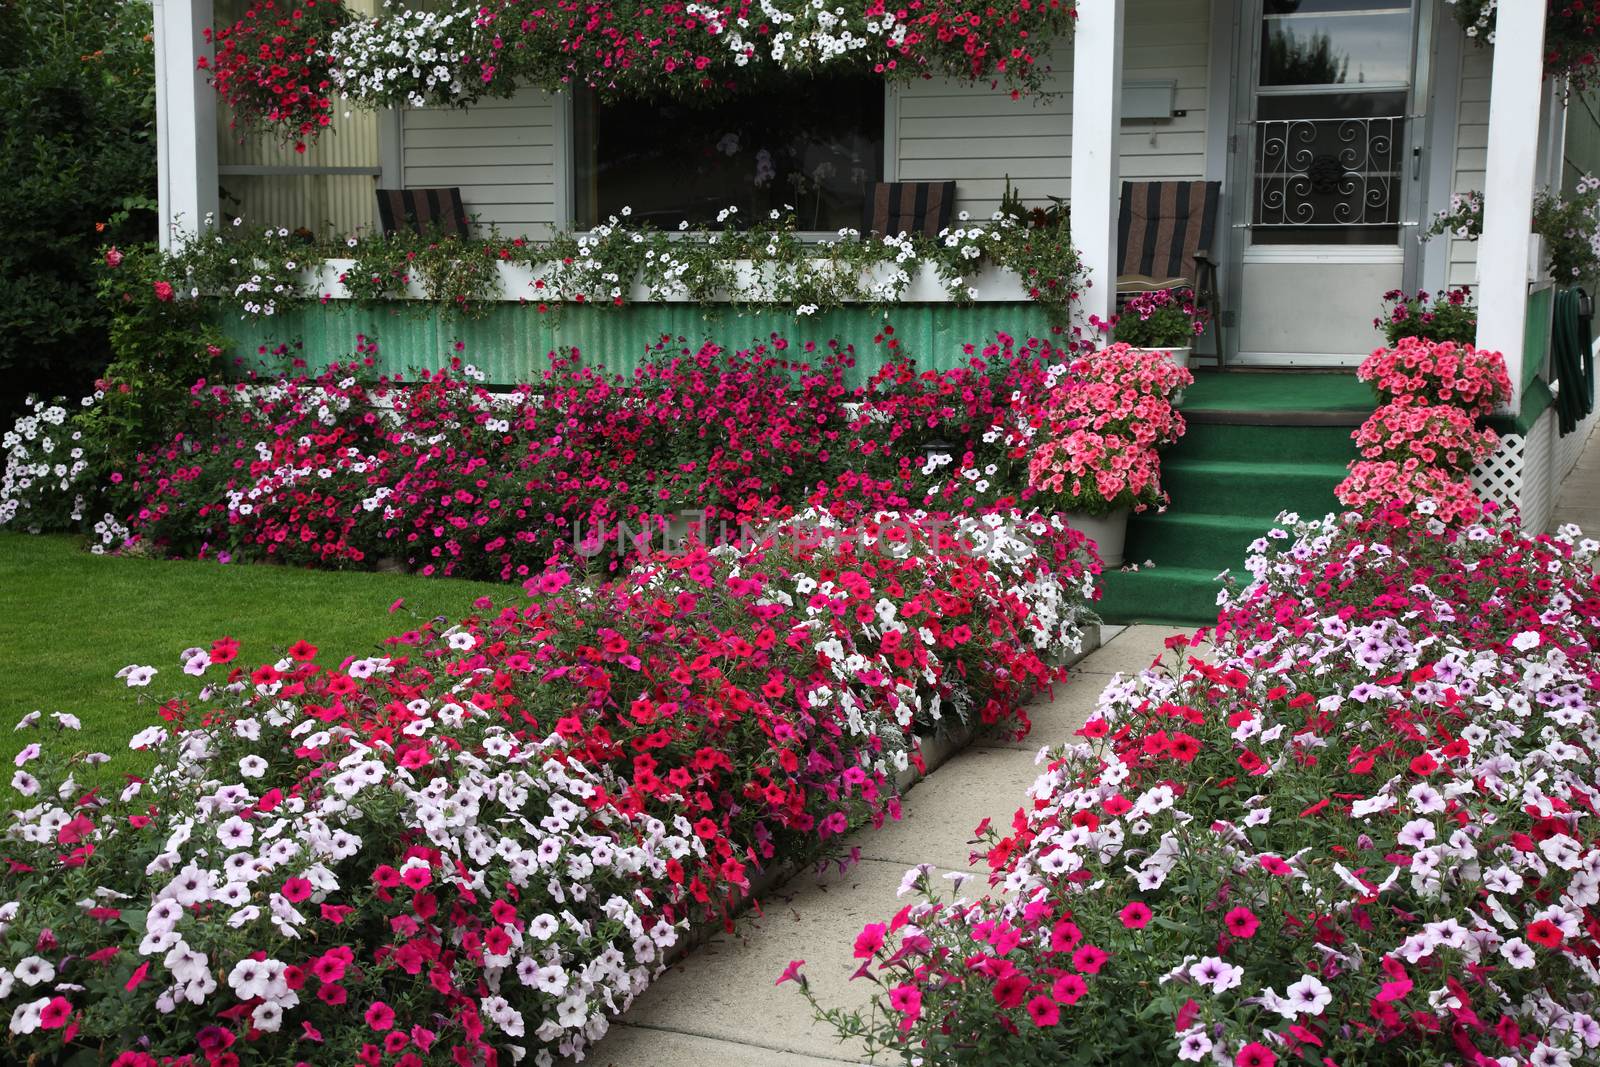 Hundreds of petunia blossoms add curb appeal to an old character home.